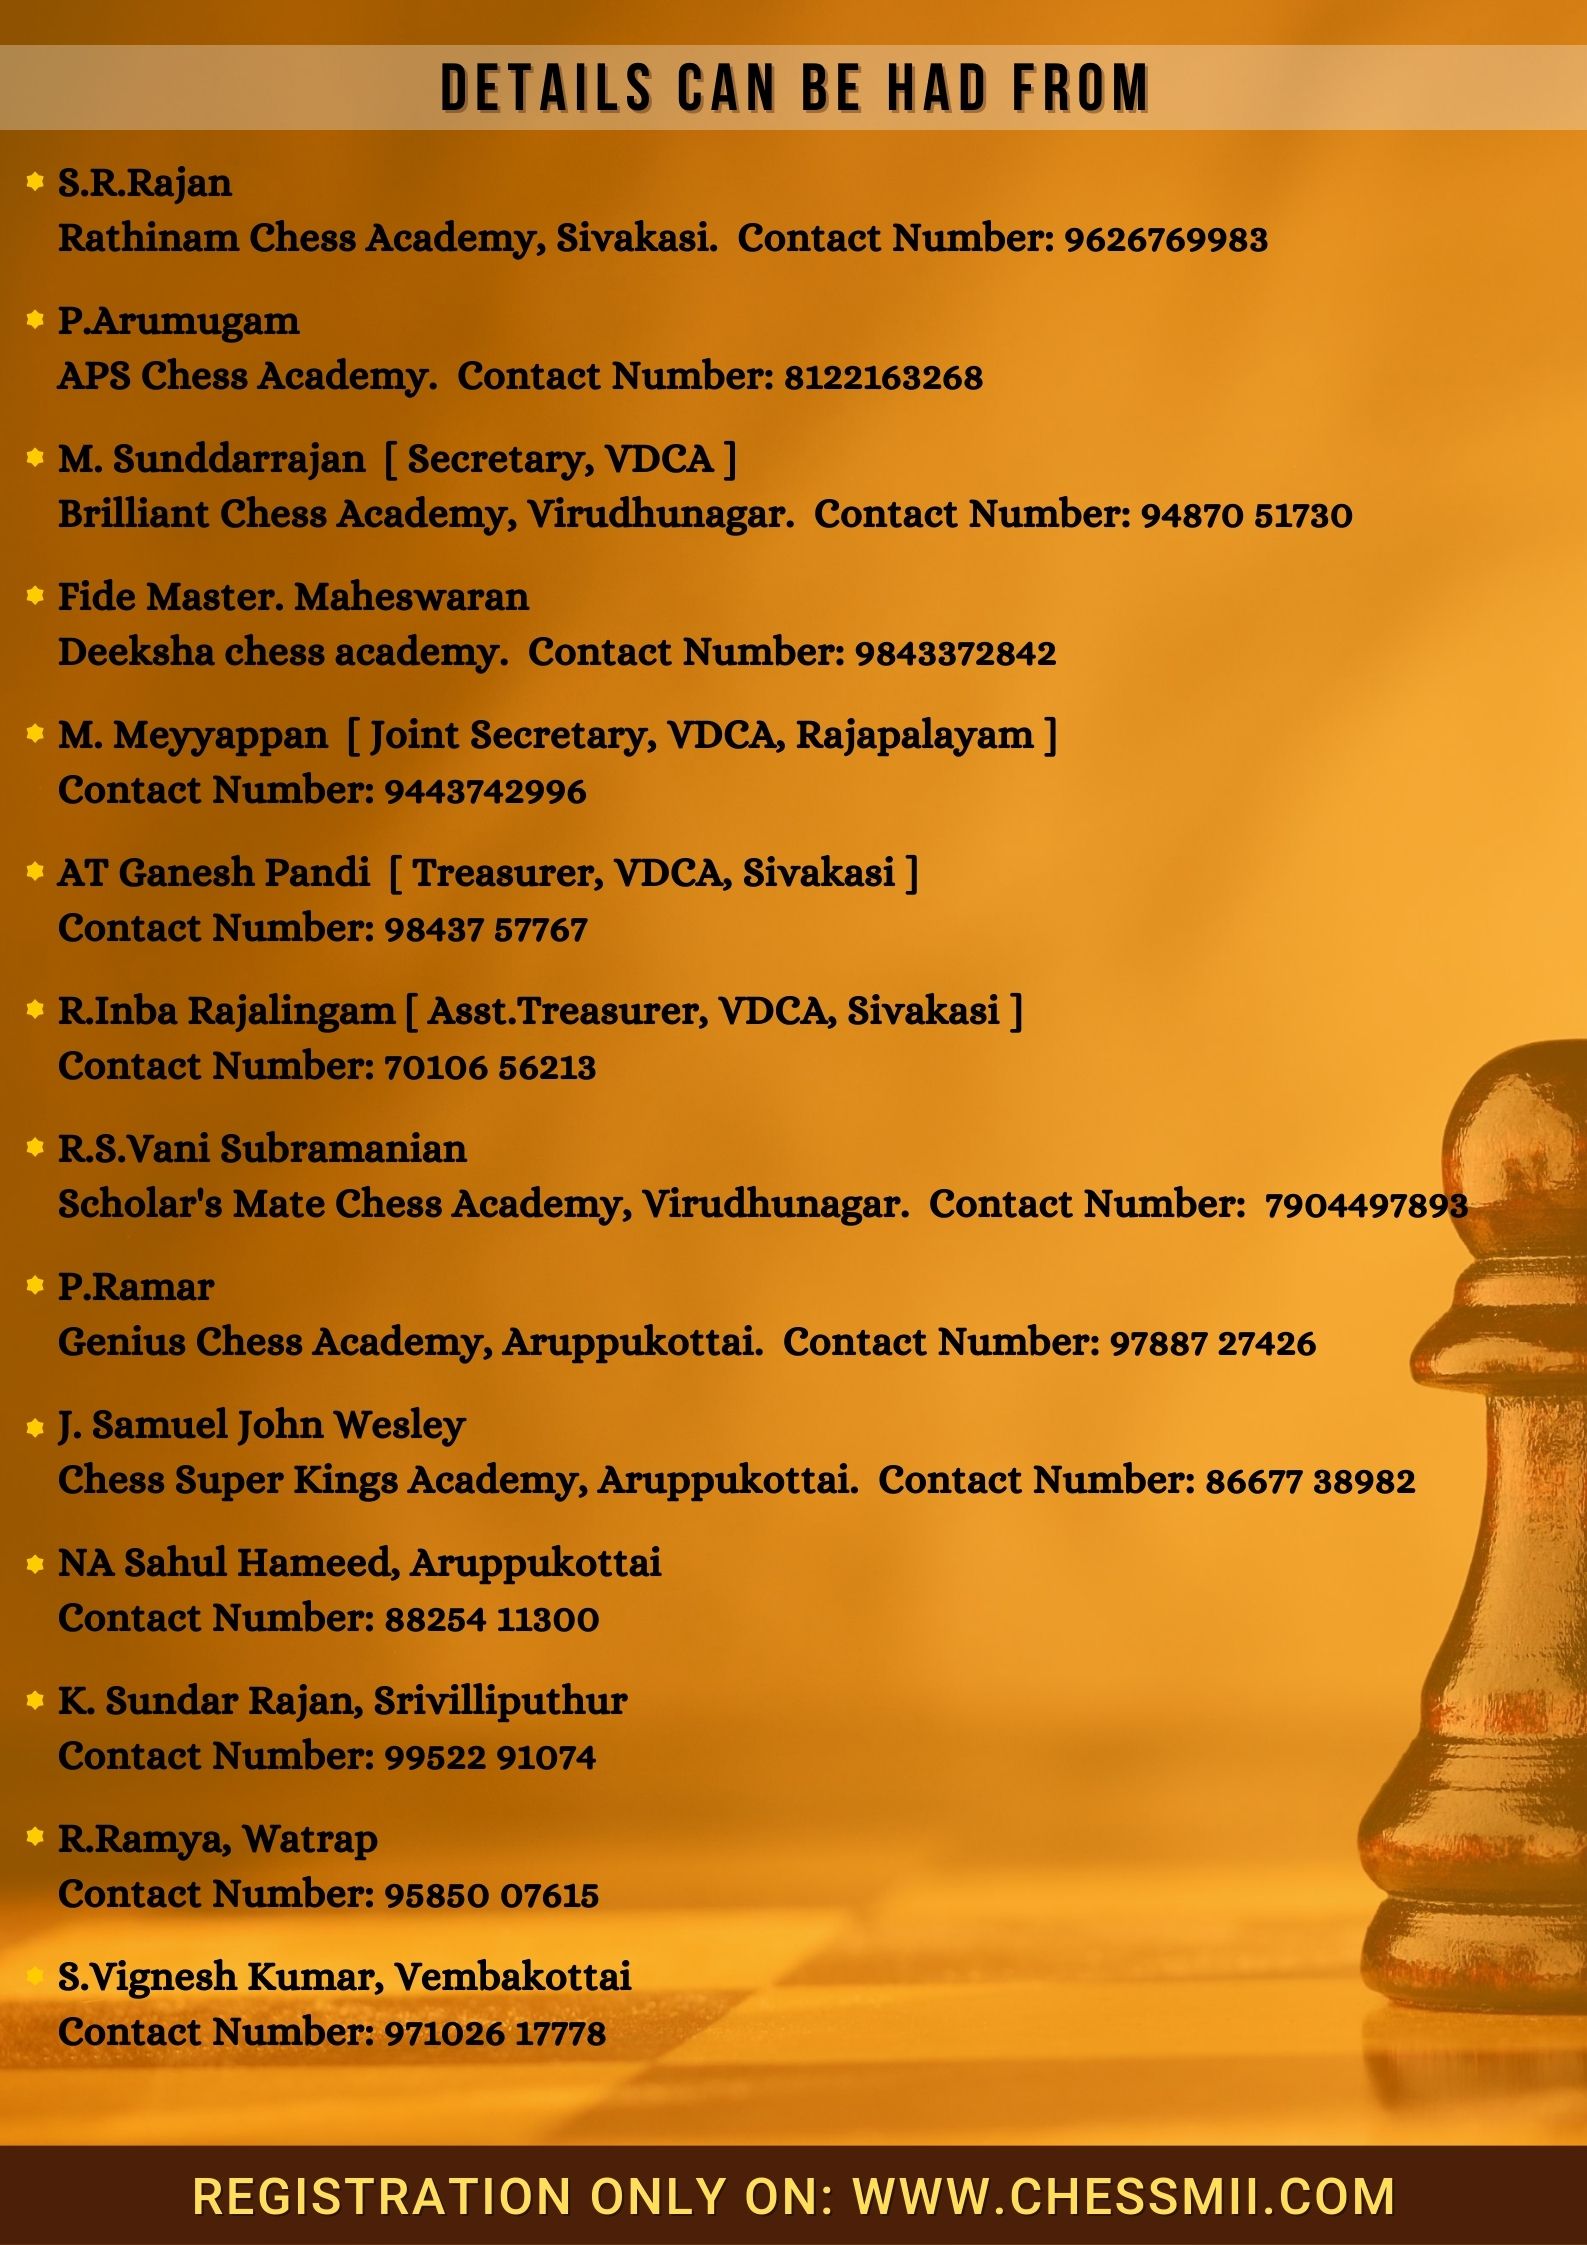 Super Kings Chess Academy